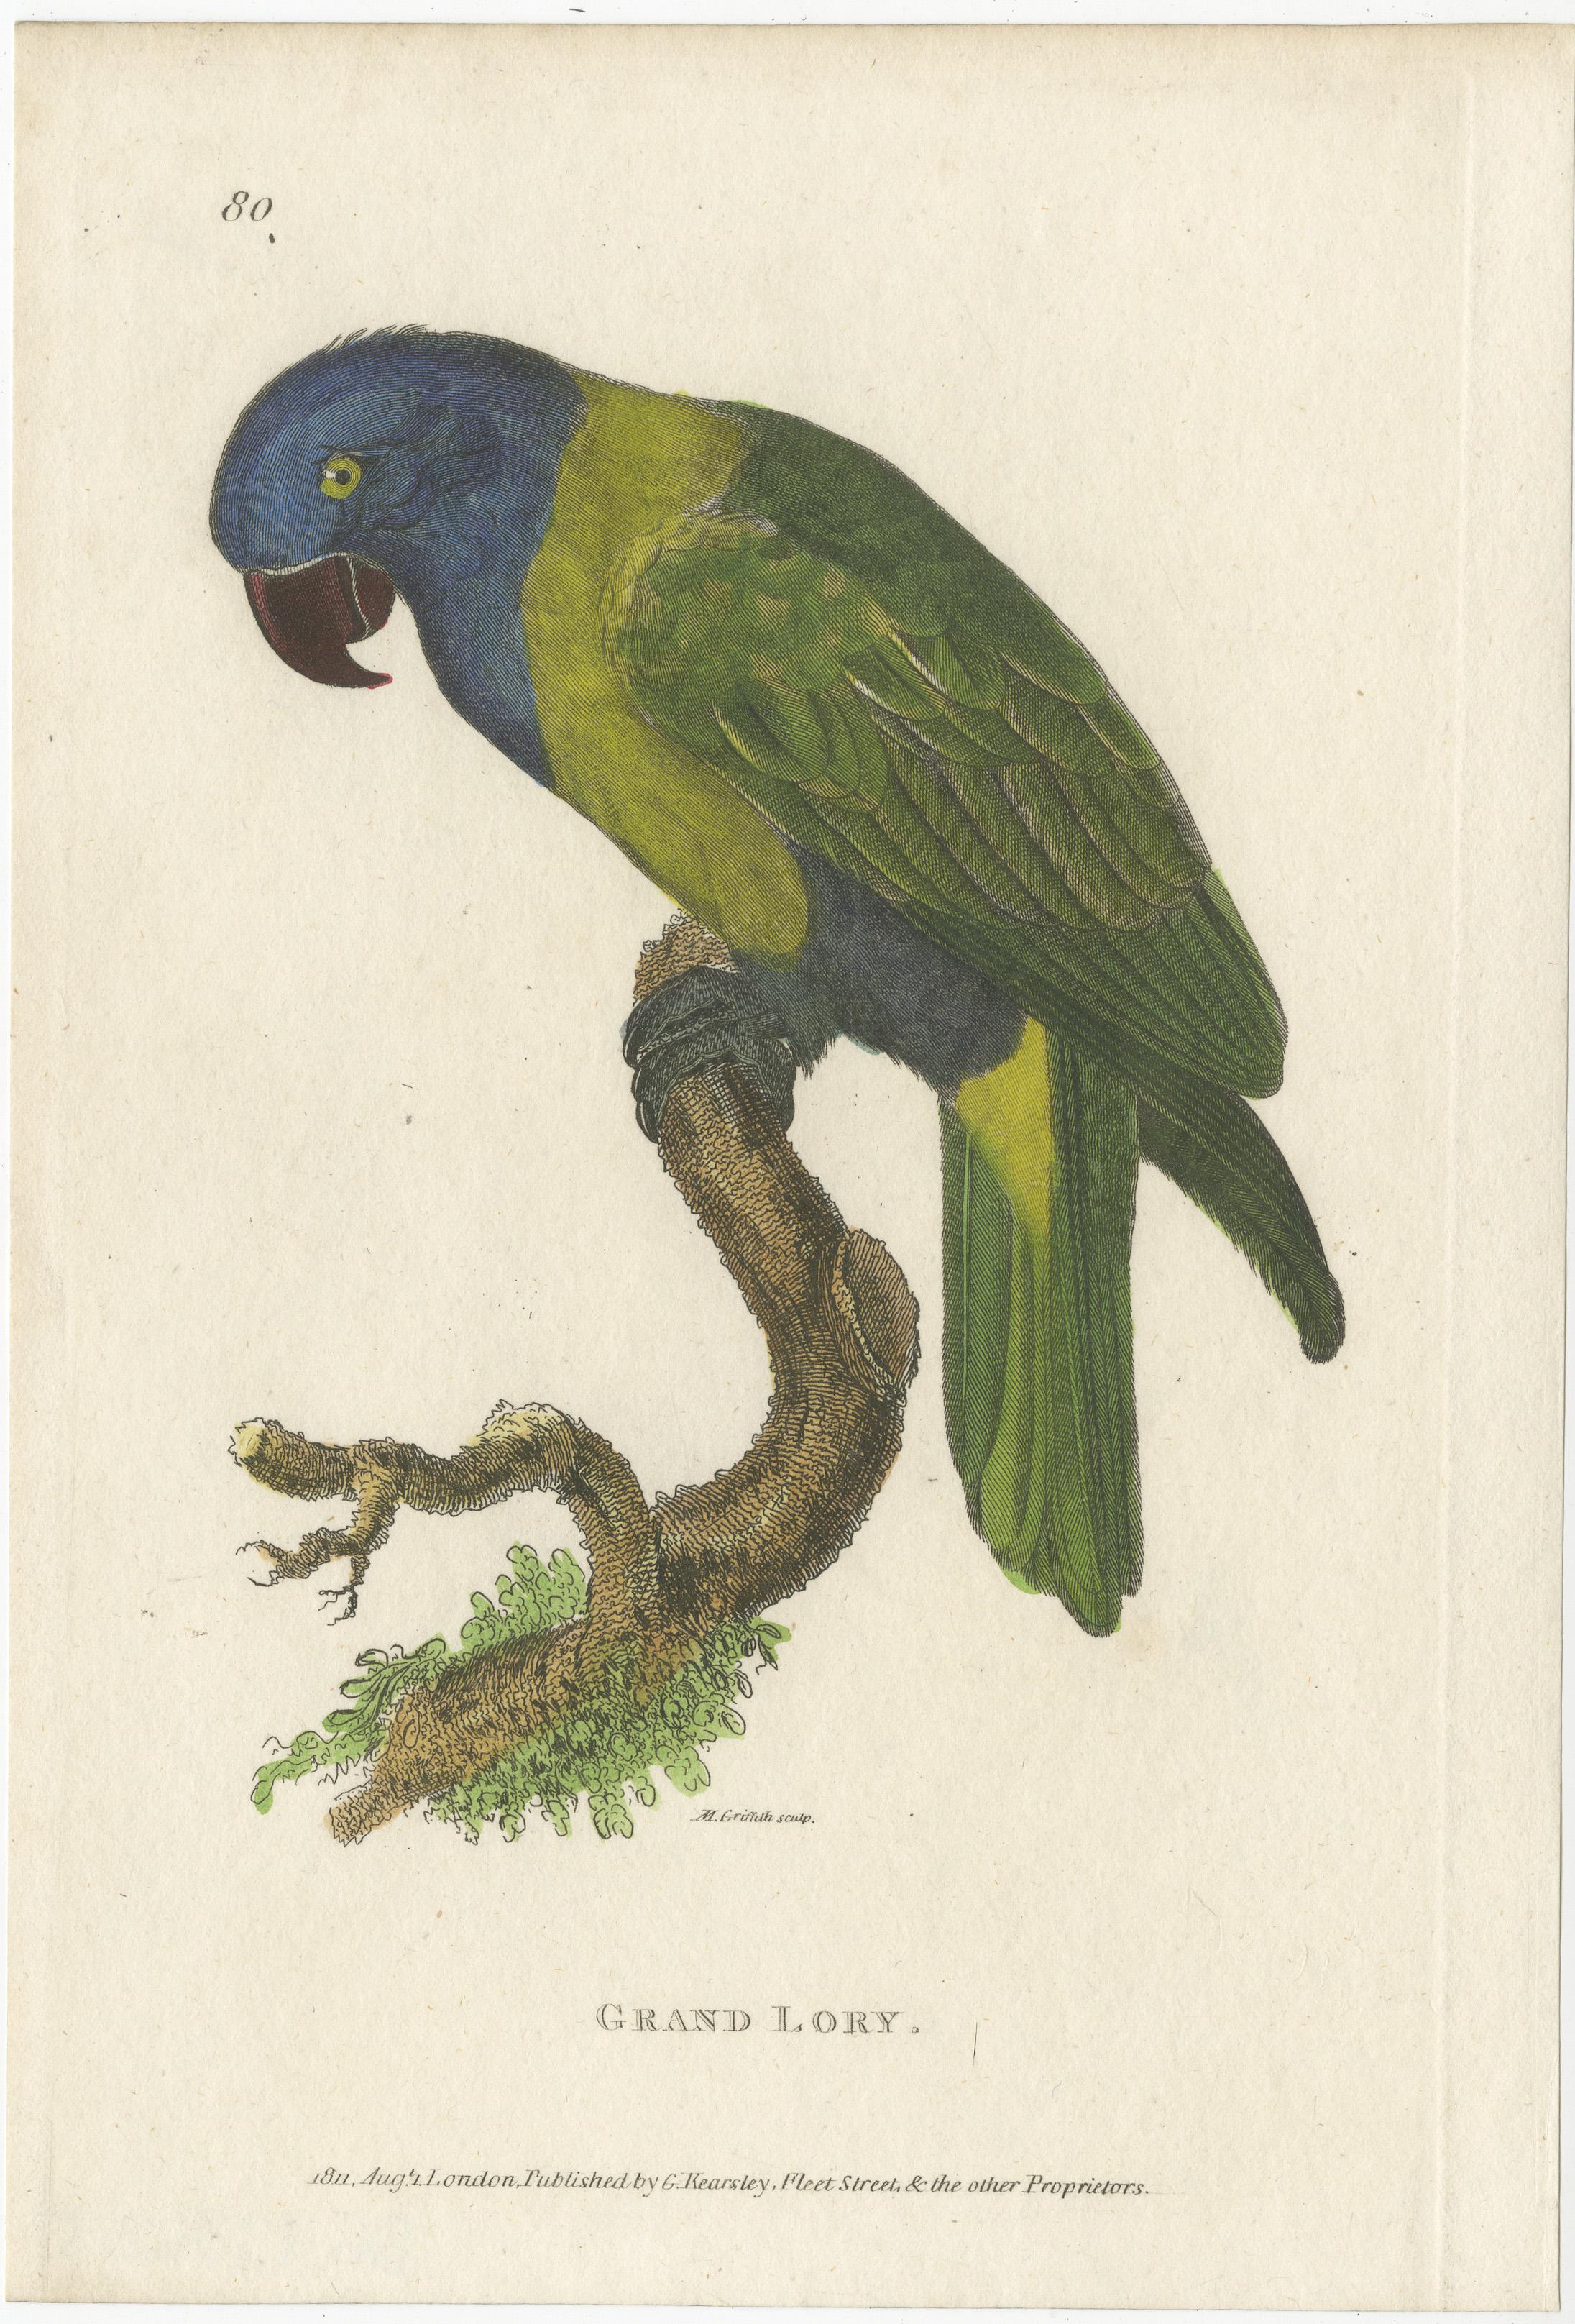 Antique bird print titled 'Grand Lory'. Hand colored print of a lory parrot. This print originates from 'Systematic Natural History'. Printed for G. Kearsley, 1800-1826.